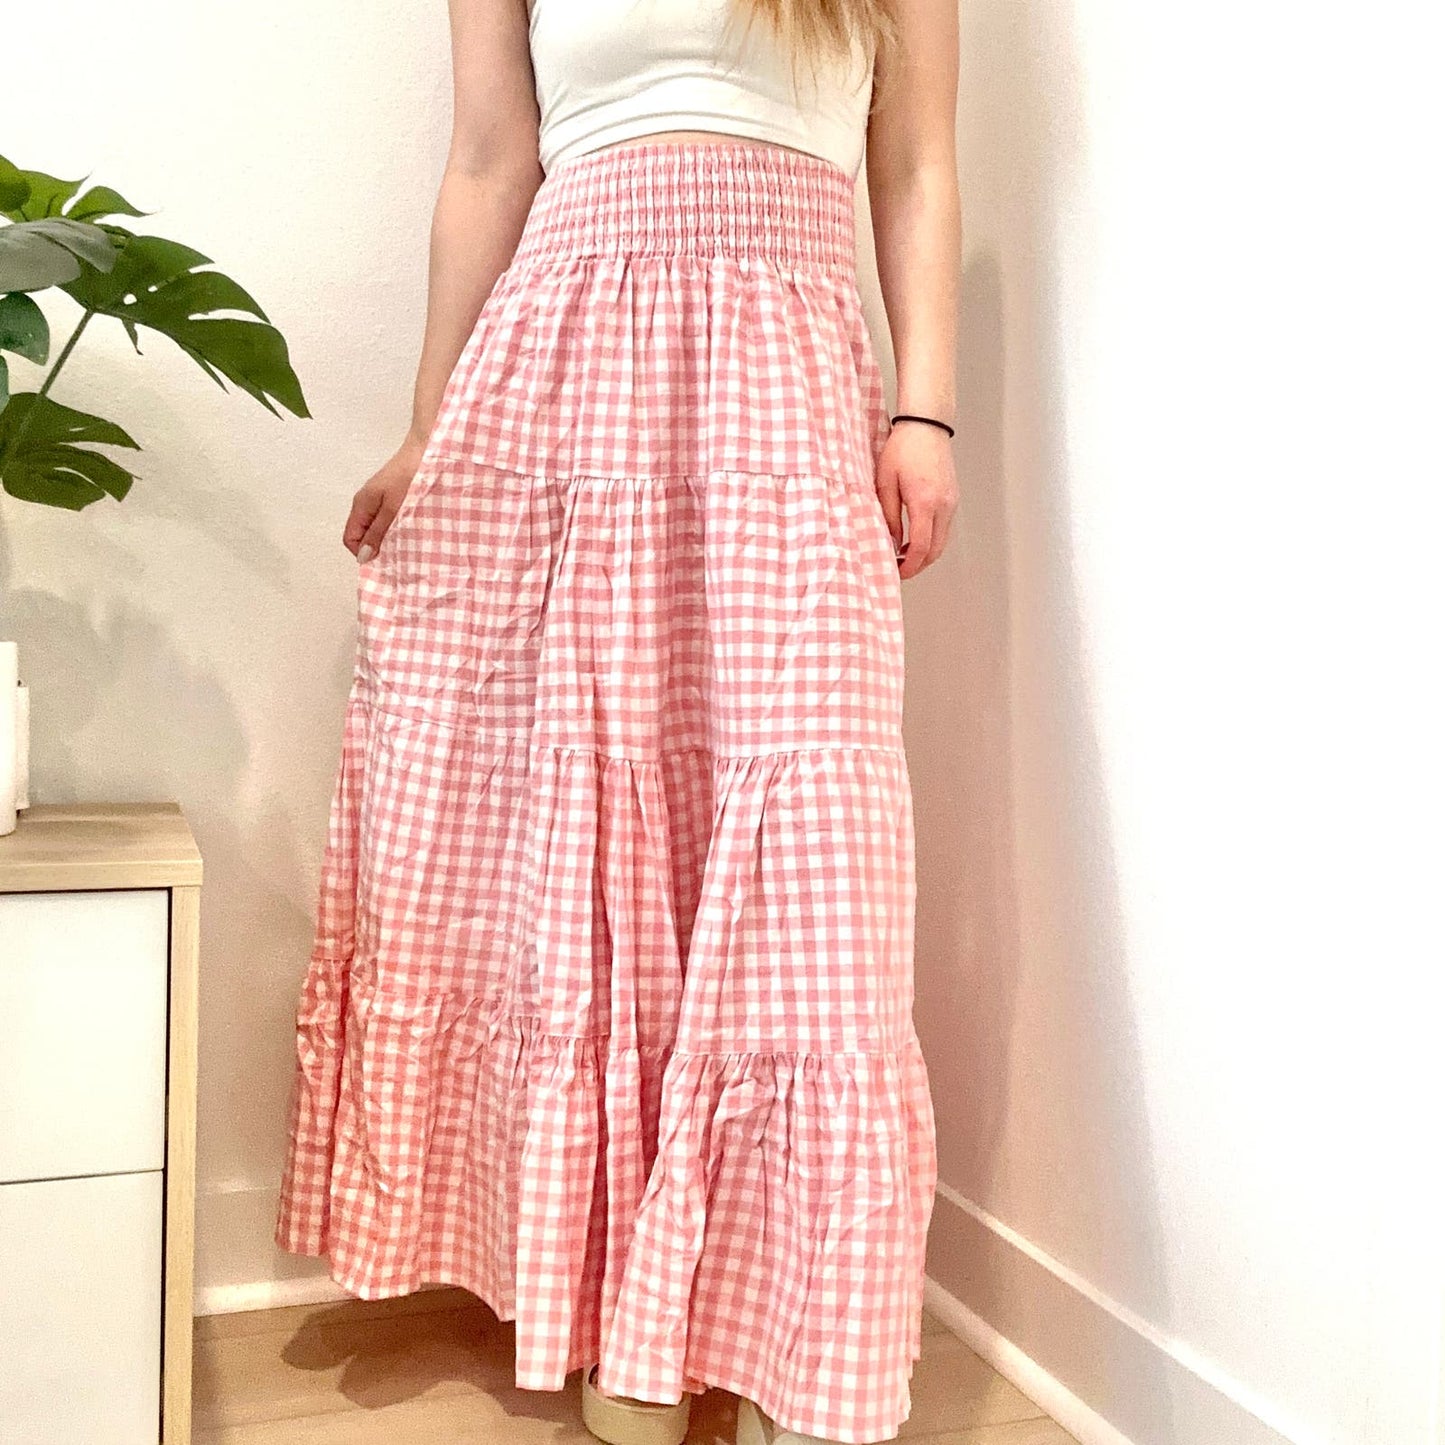 Petal & Pup Aldgate pink white gingham tiered ruffle maxi skirt